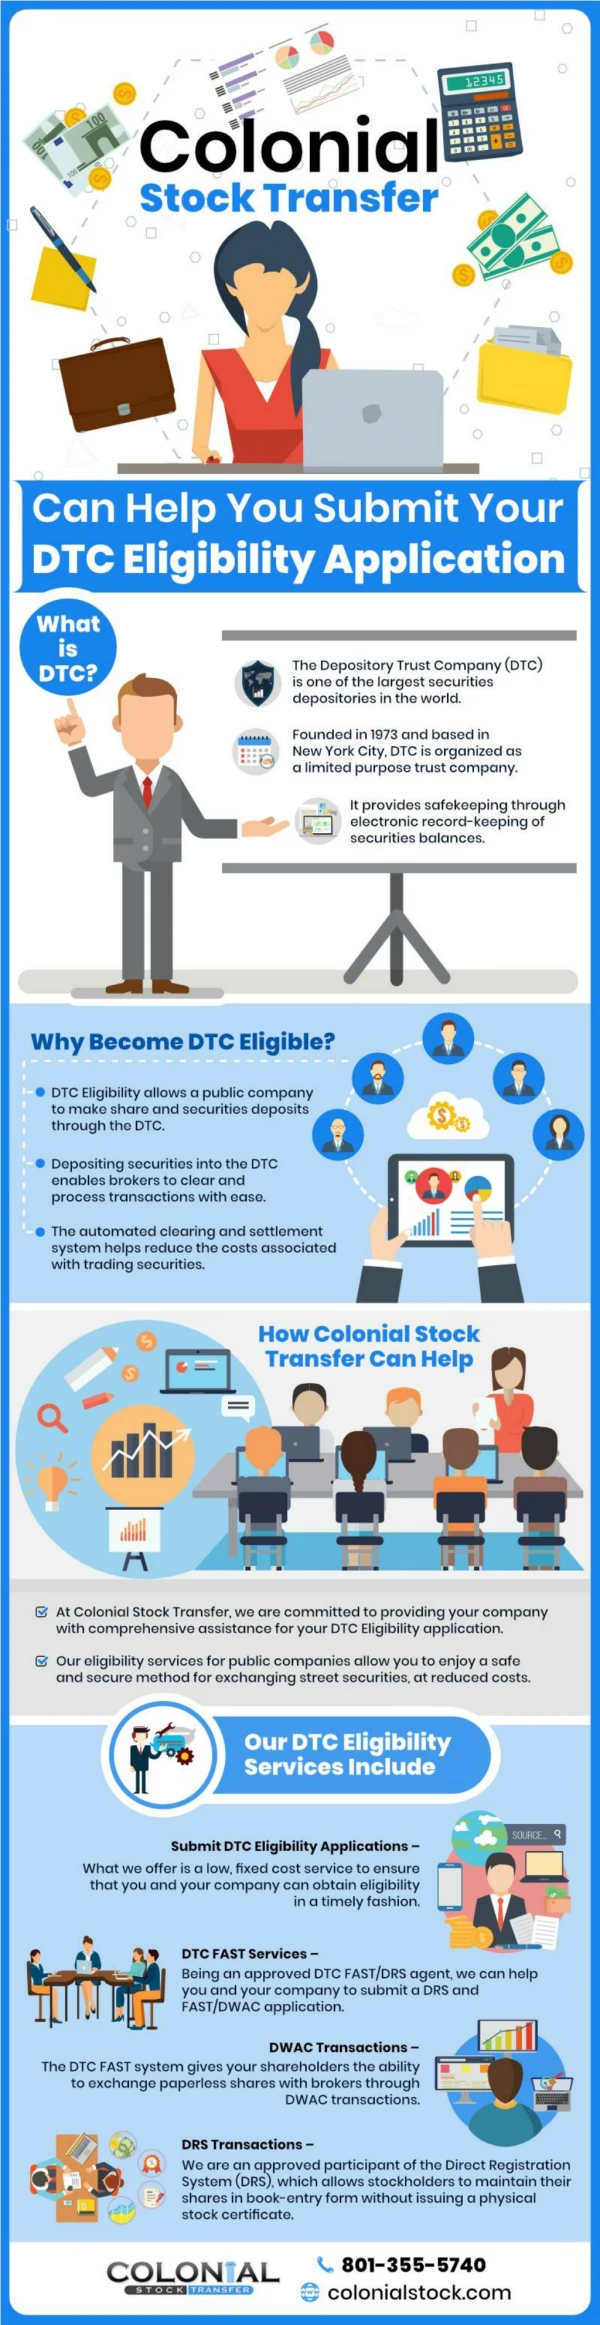 Colonial Stock Transfer can Help you Submit your DTC Eligibility Application